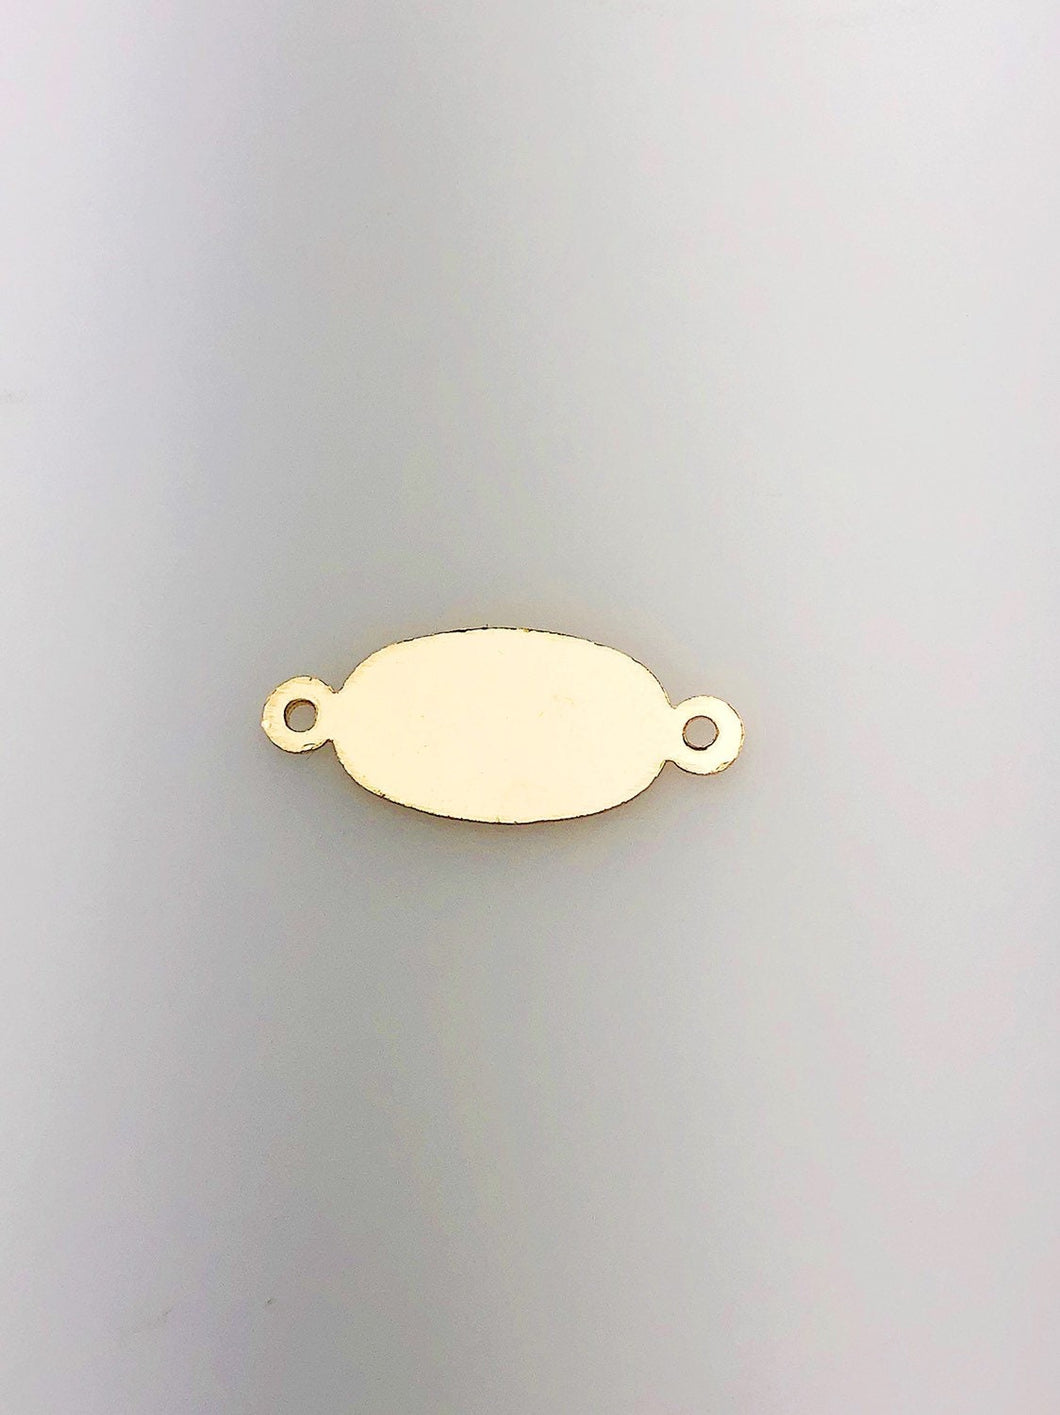 14K Gold Fill Oval Tag Charm w/ Two Rings, 8.6x20.9mm, Made in USA - 2598